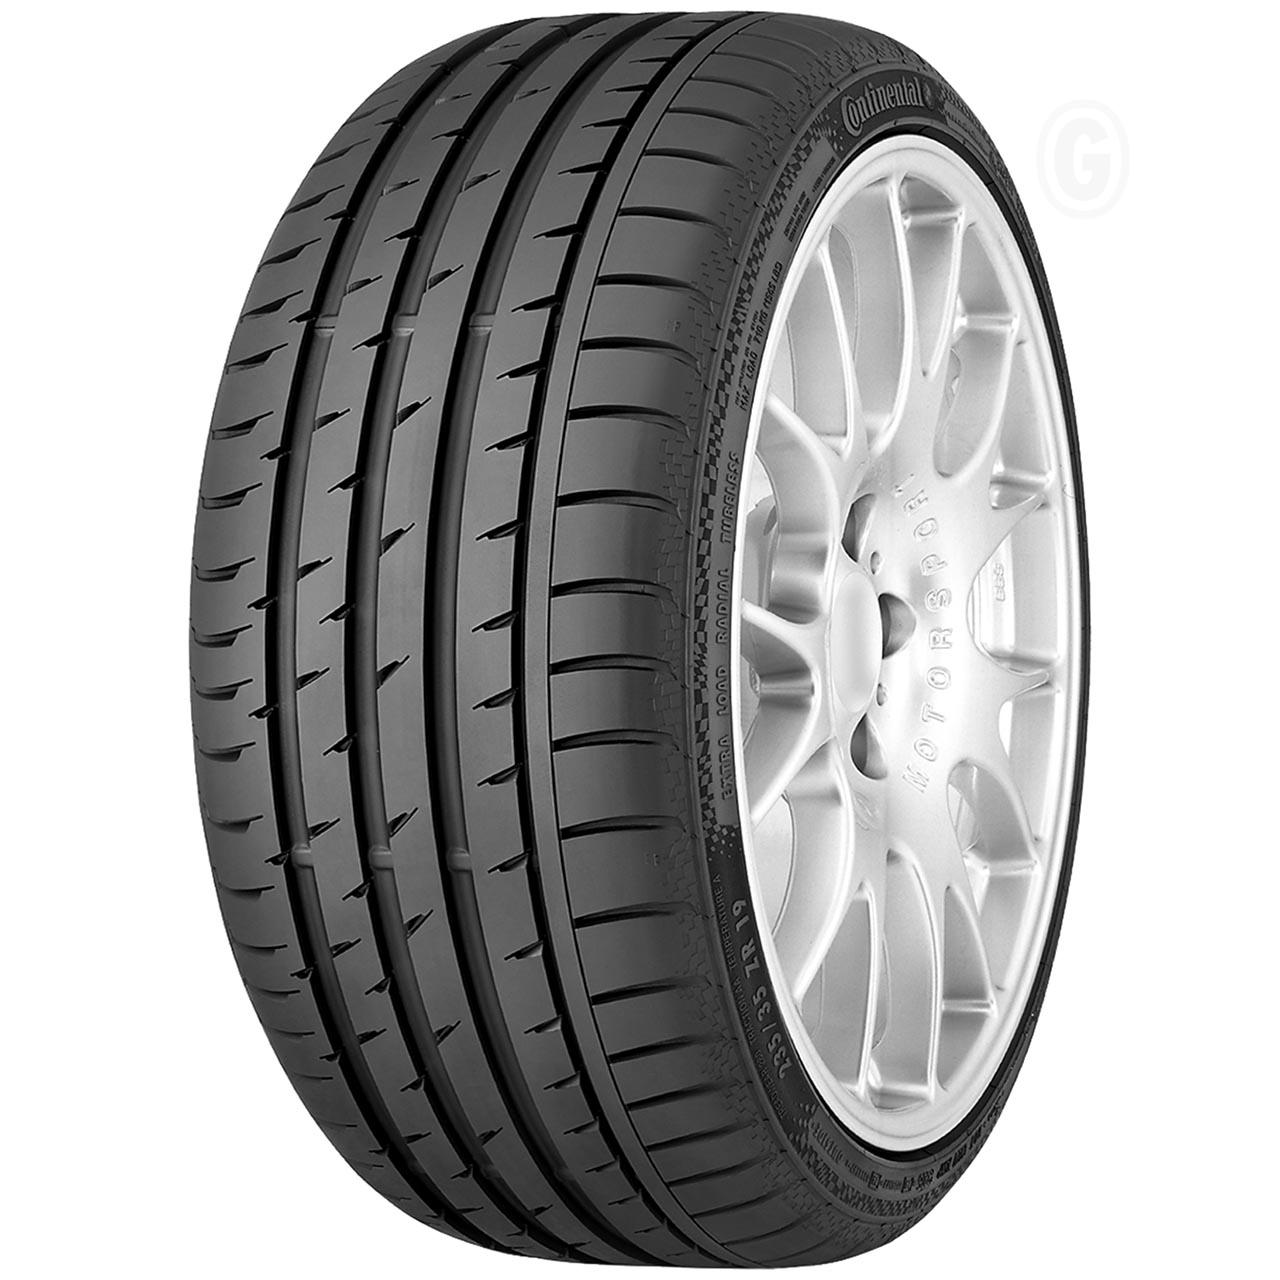 Continental CONTISPORTCONTACT 3 255/40R17 94W FR ML MO